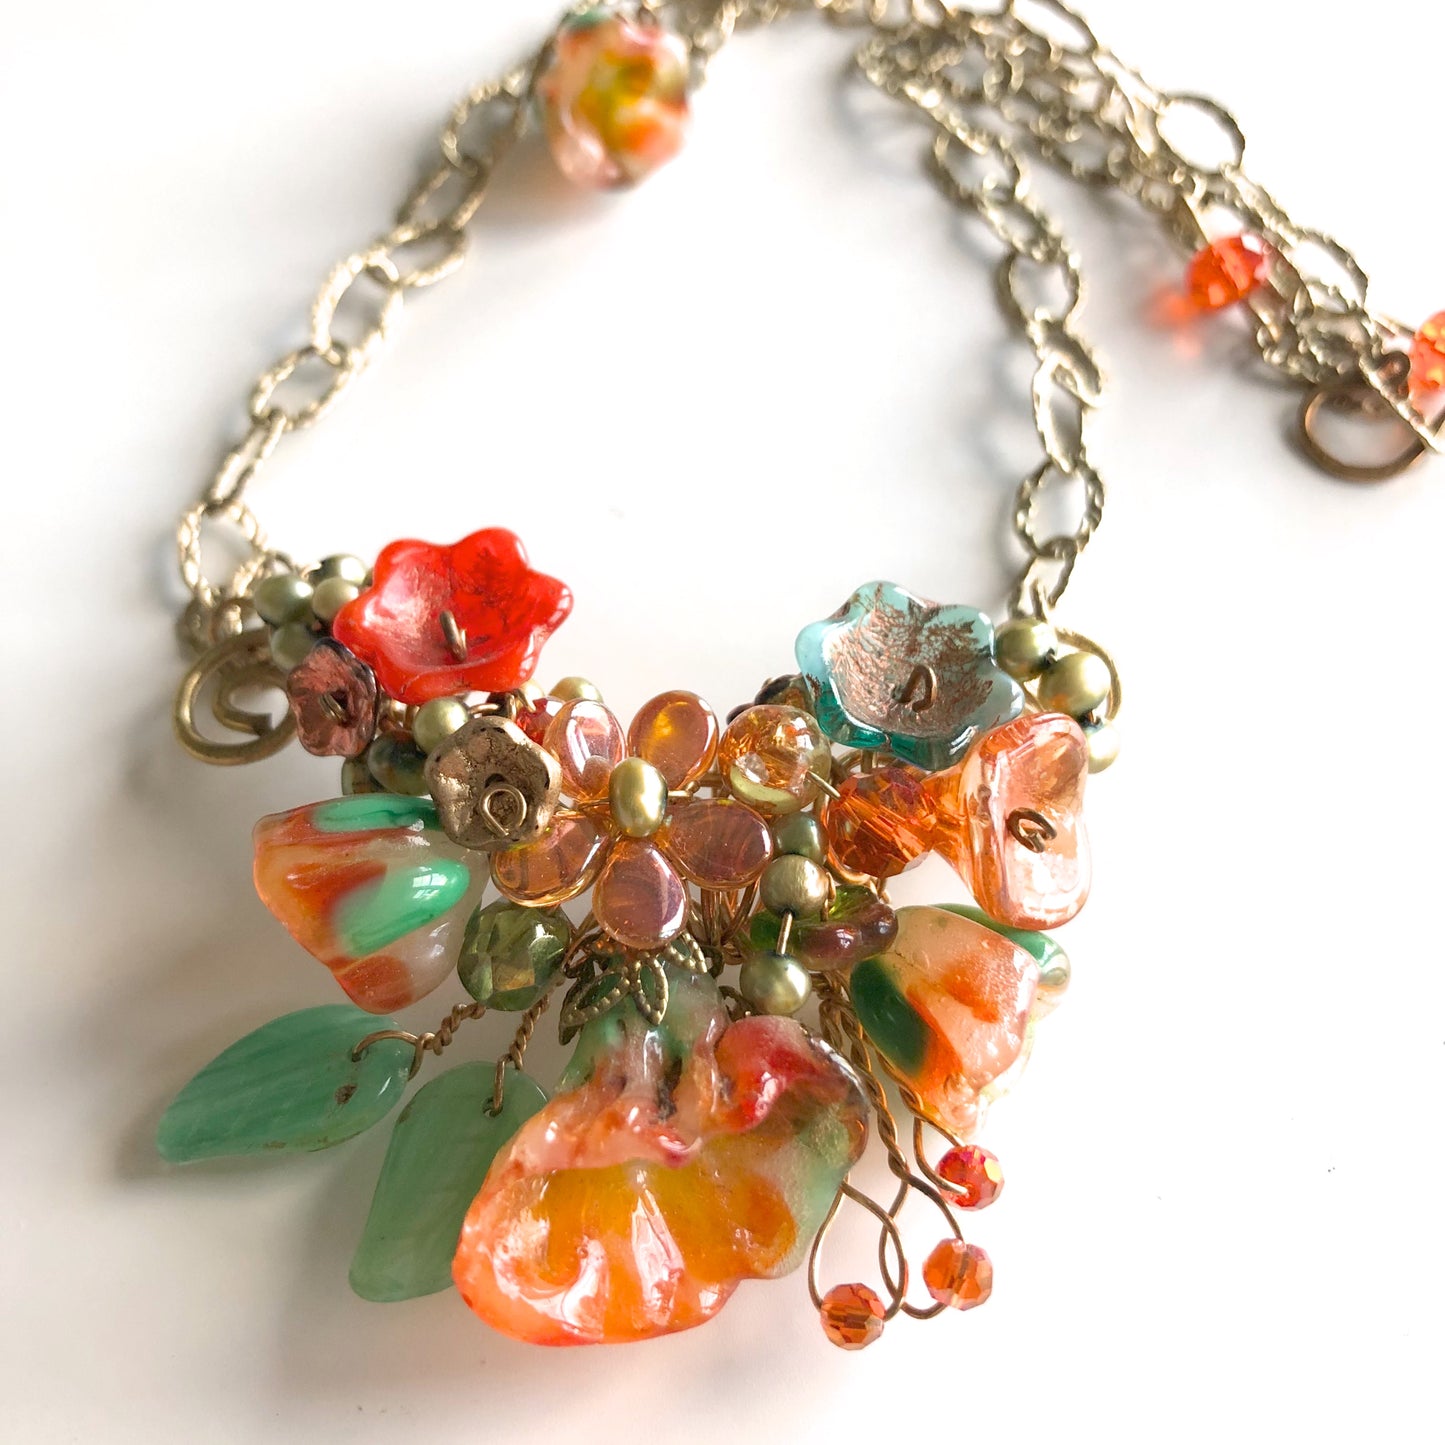 Orange & Teal Gypsy Rose Necklace by Mary Lowe - © Blue Pomegranate Gallery